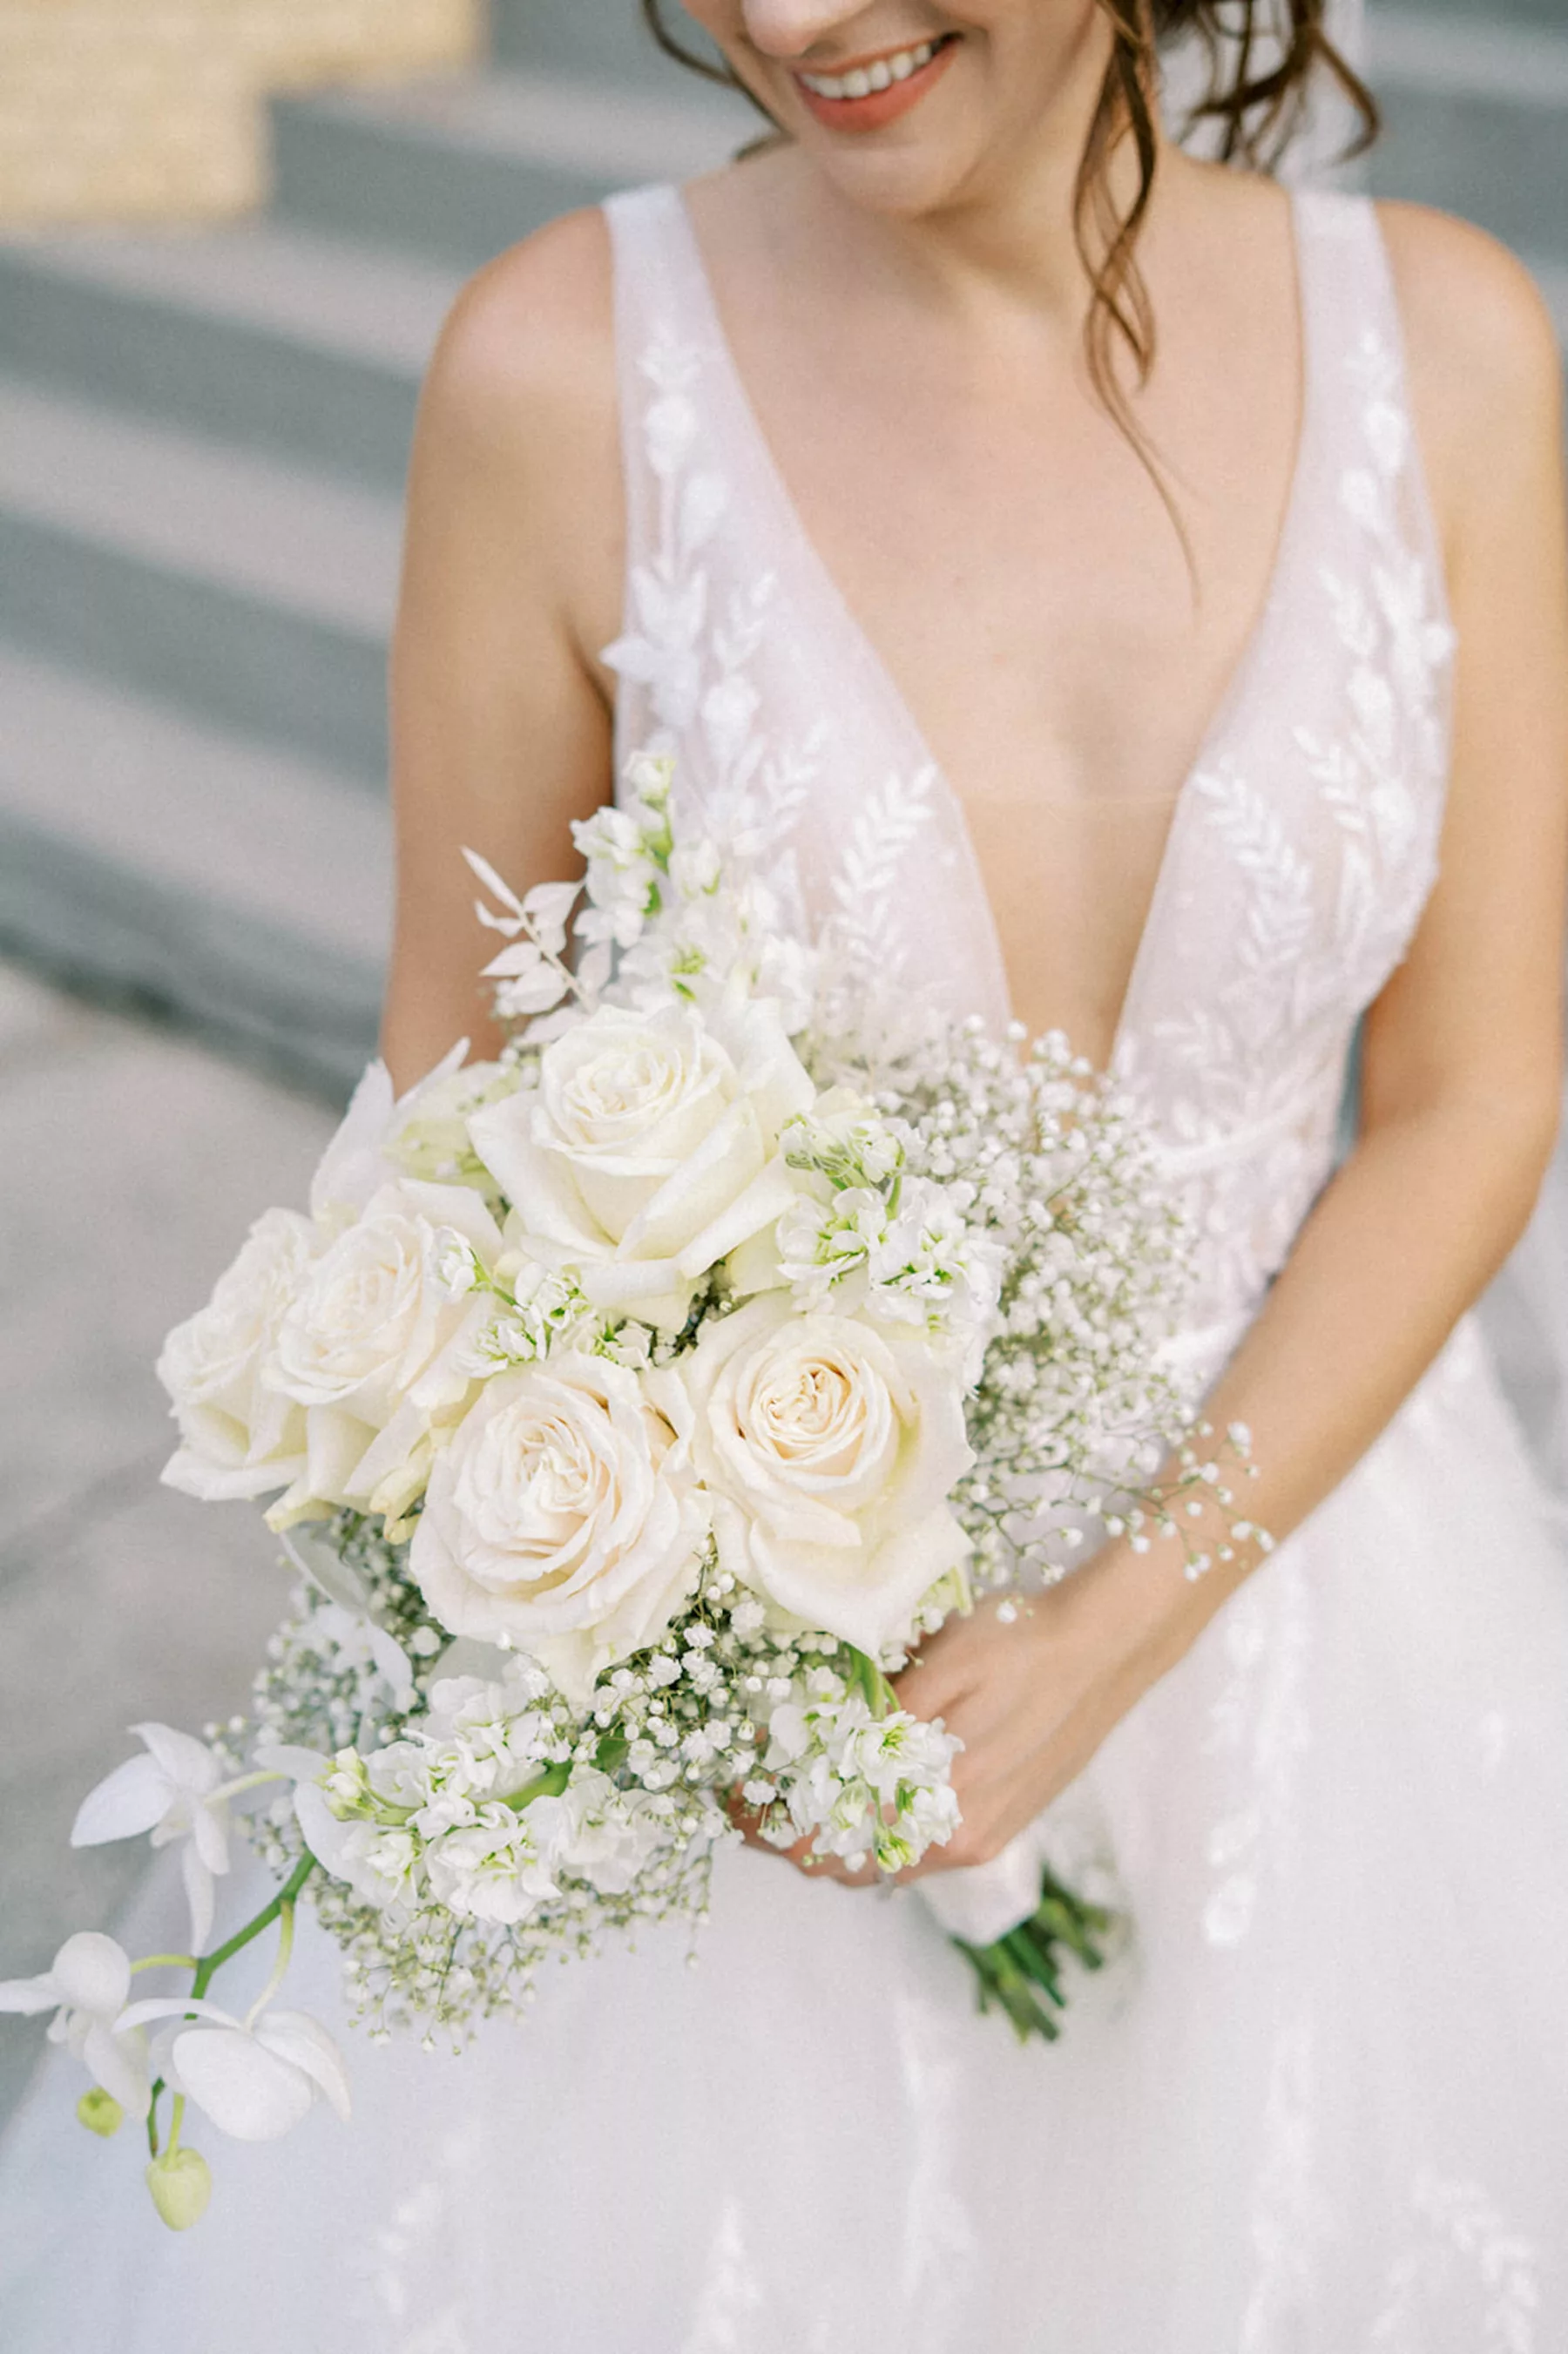 Elegant White Tulle Deep V Neckline A Line Wedding Dress Ideas | Monochromatic Bridal Bouquet with White Roses, Baby's Breath, Orchids, and Stock Flowers Inspiration